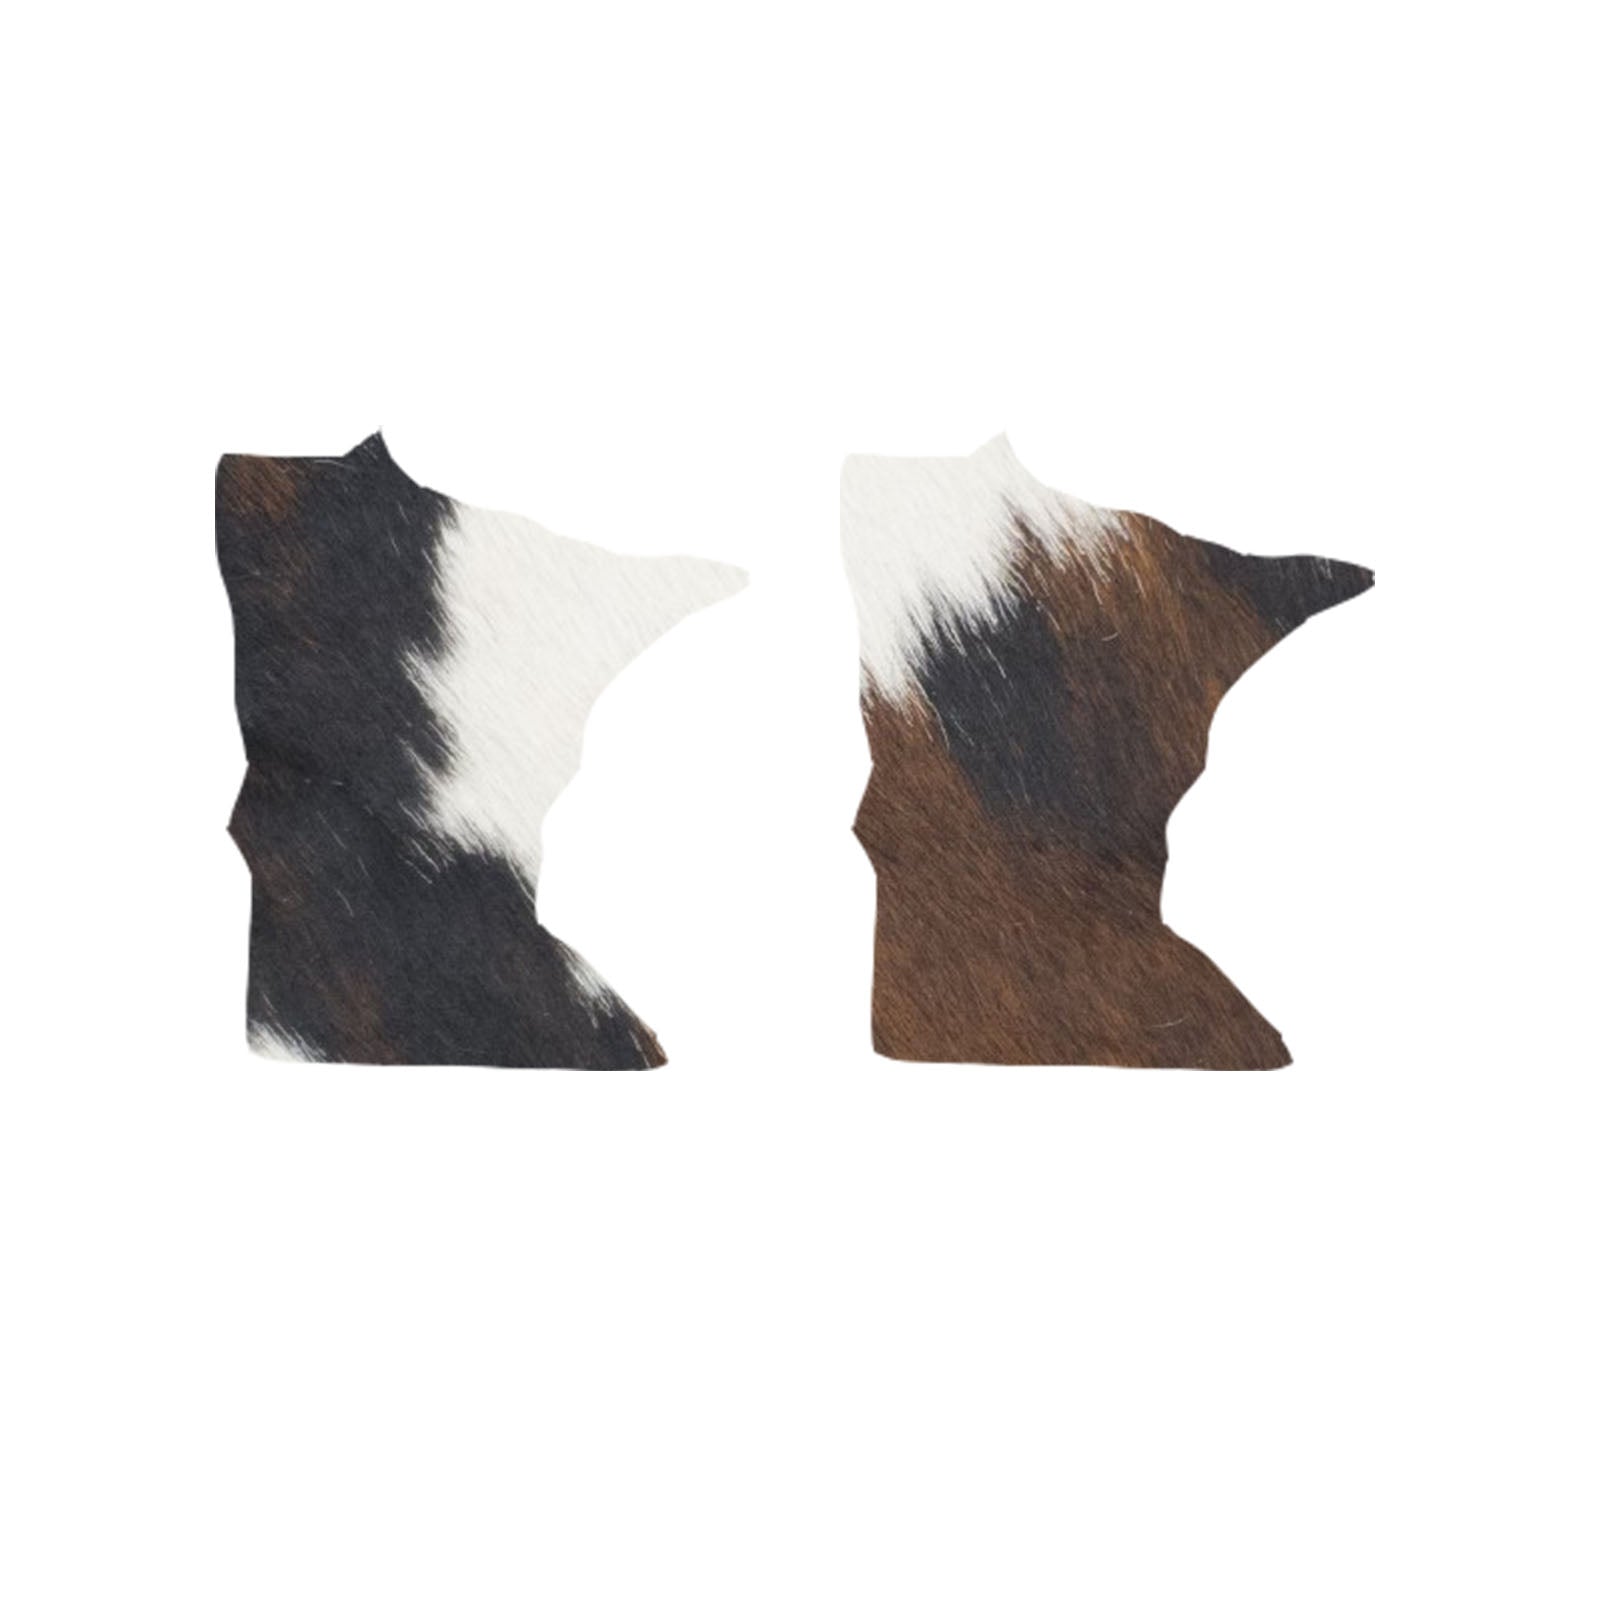 Tri-Colored Black/Brown/Off White Hair On Die Cut Earrings, Minnesota | The Leather Guy